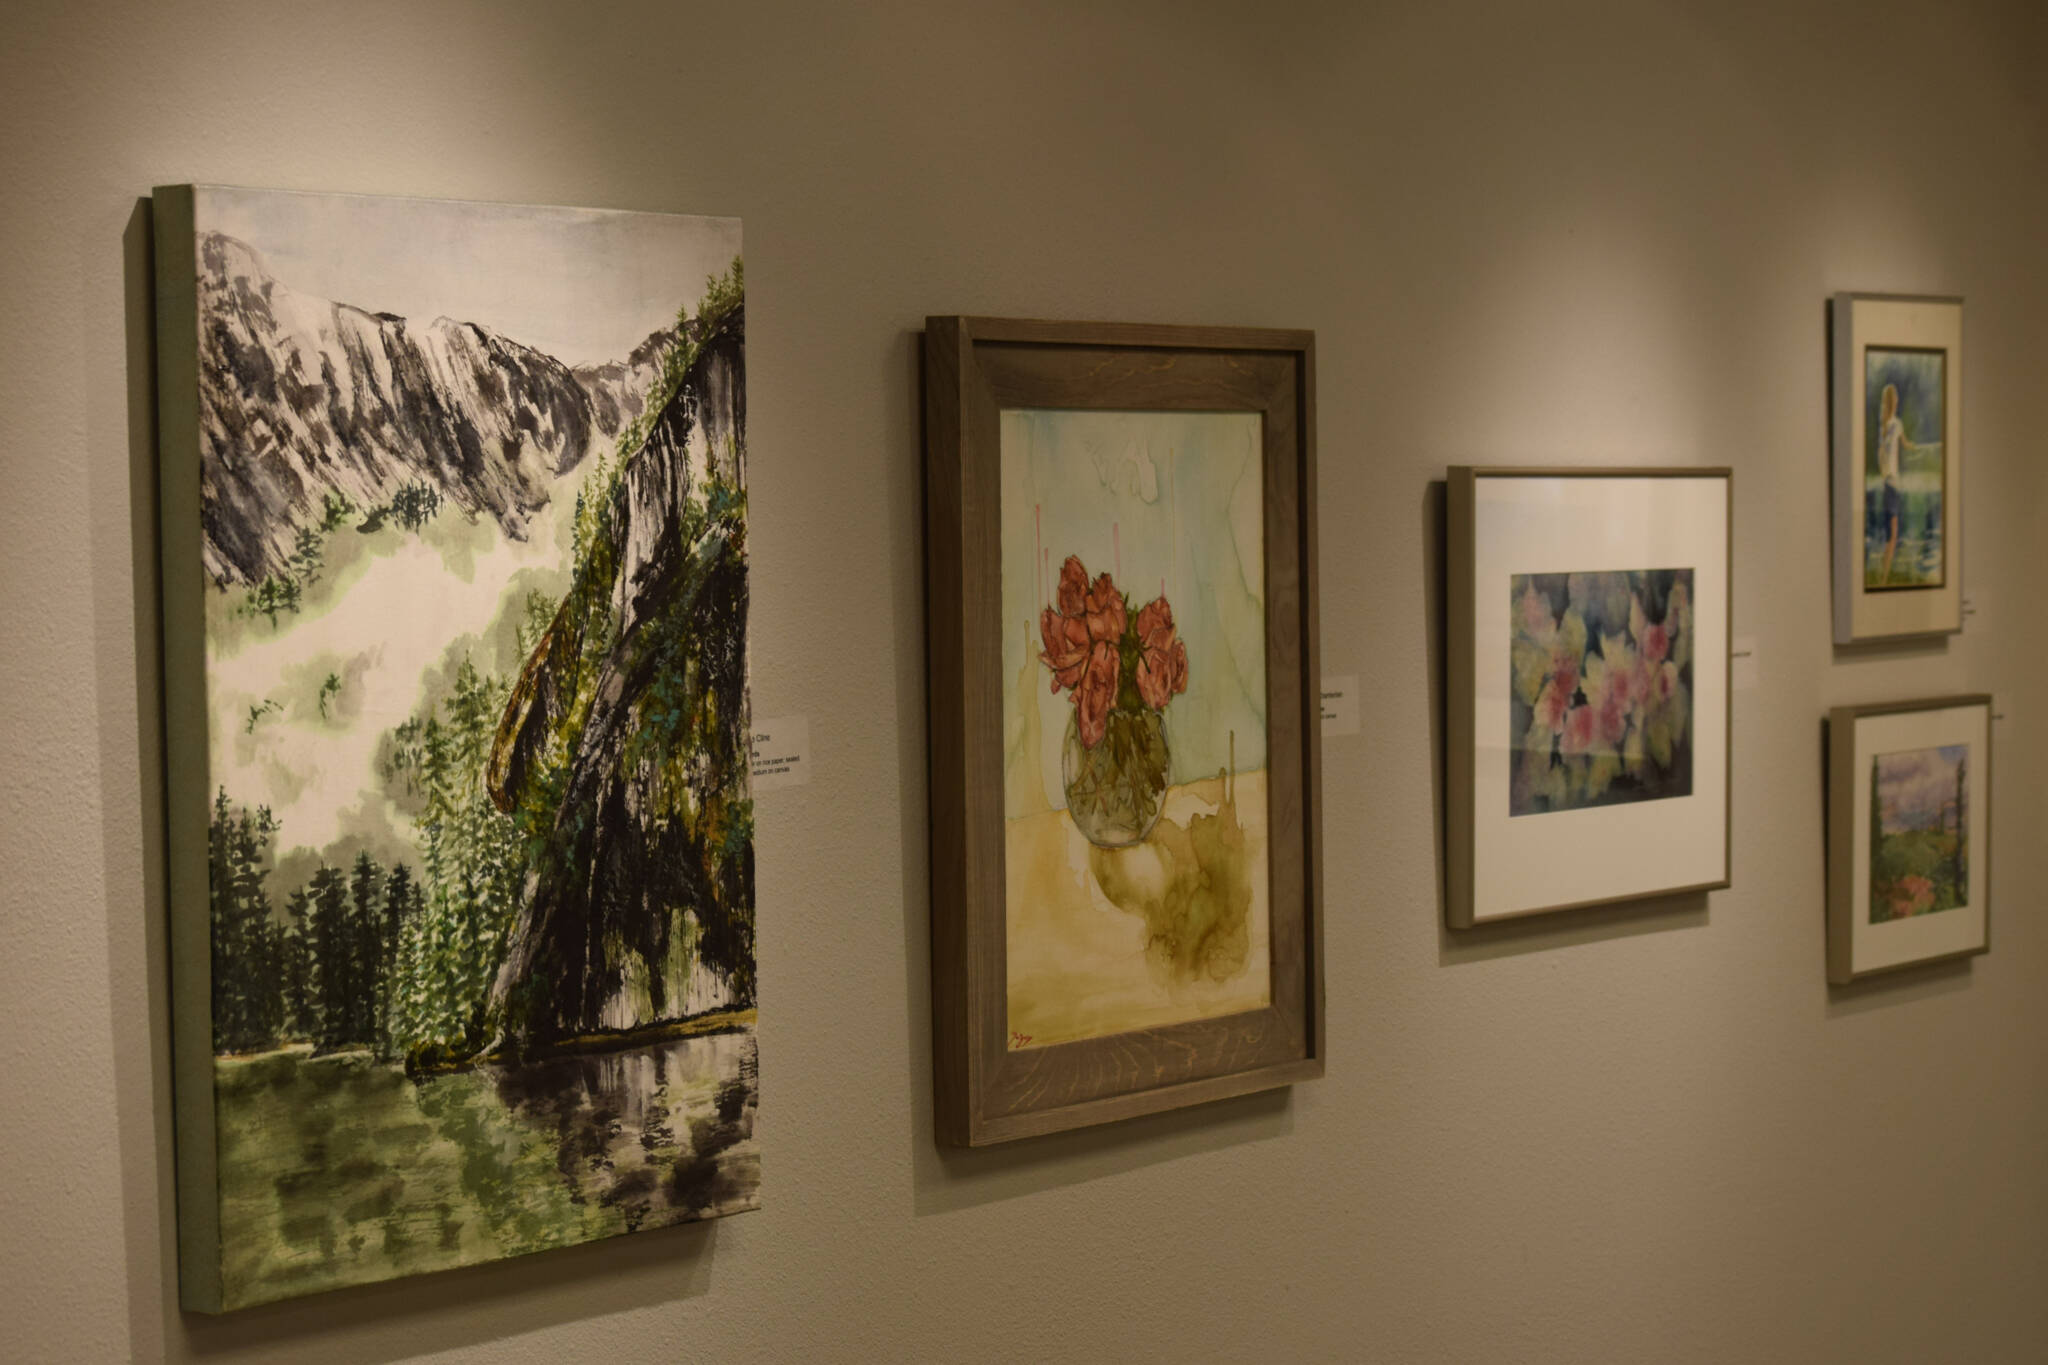 Camille Botello / Peninsula Clarion
Prints are featured in the “Open Watercolor” show at the Kenai Art Center on Wednesday.